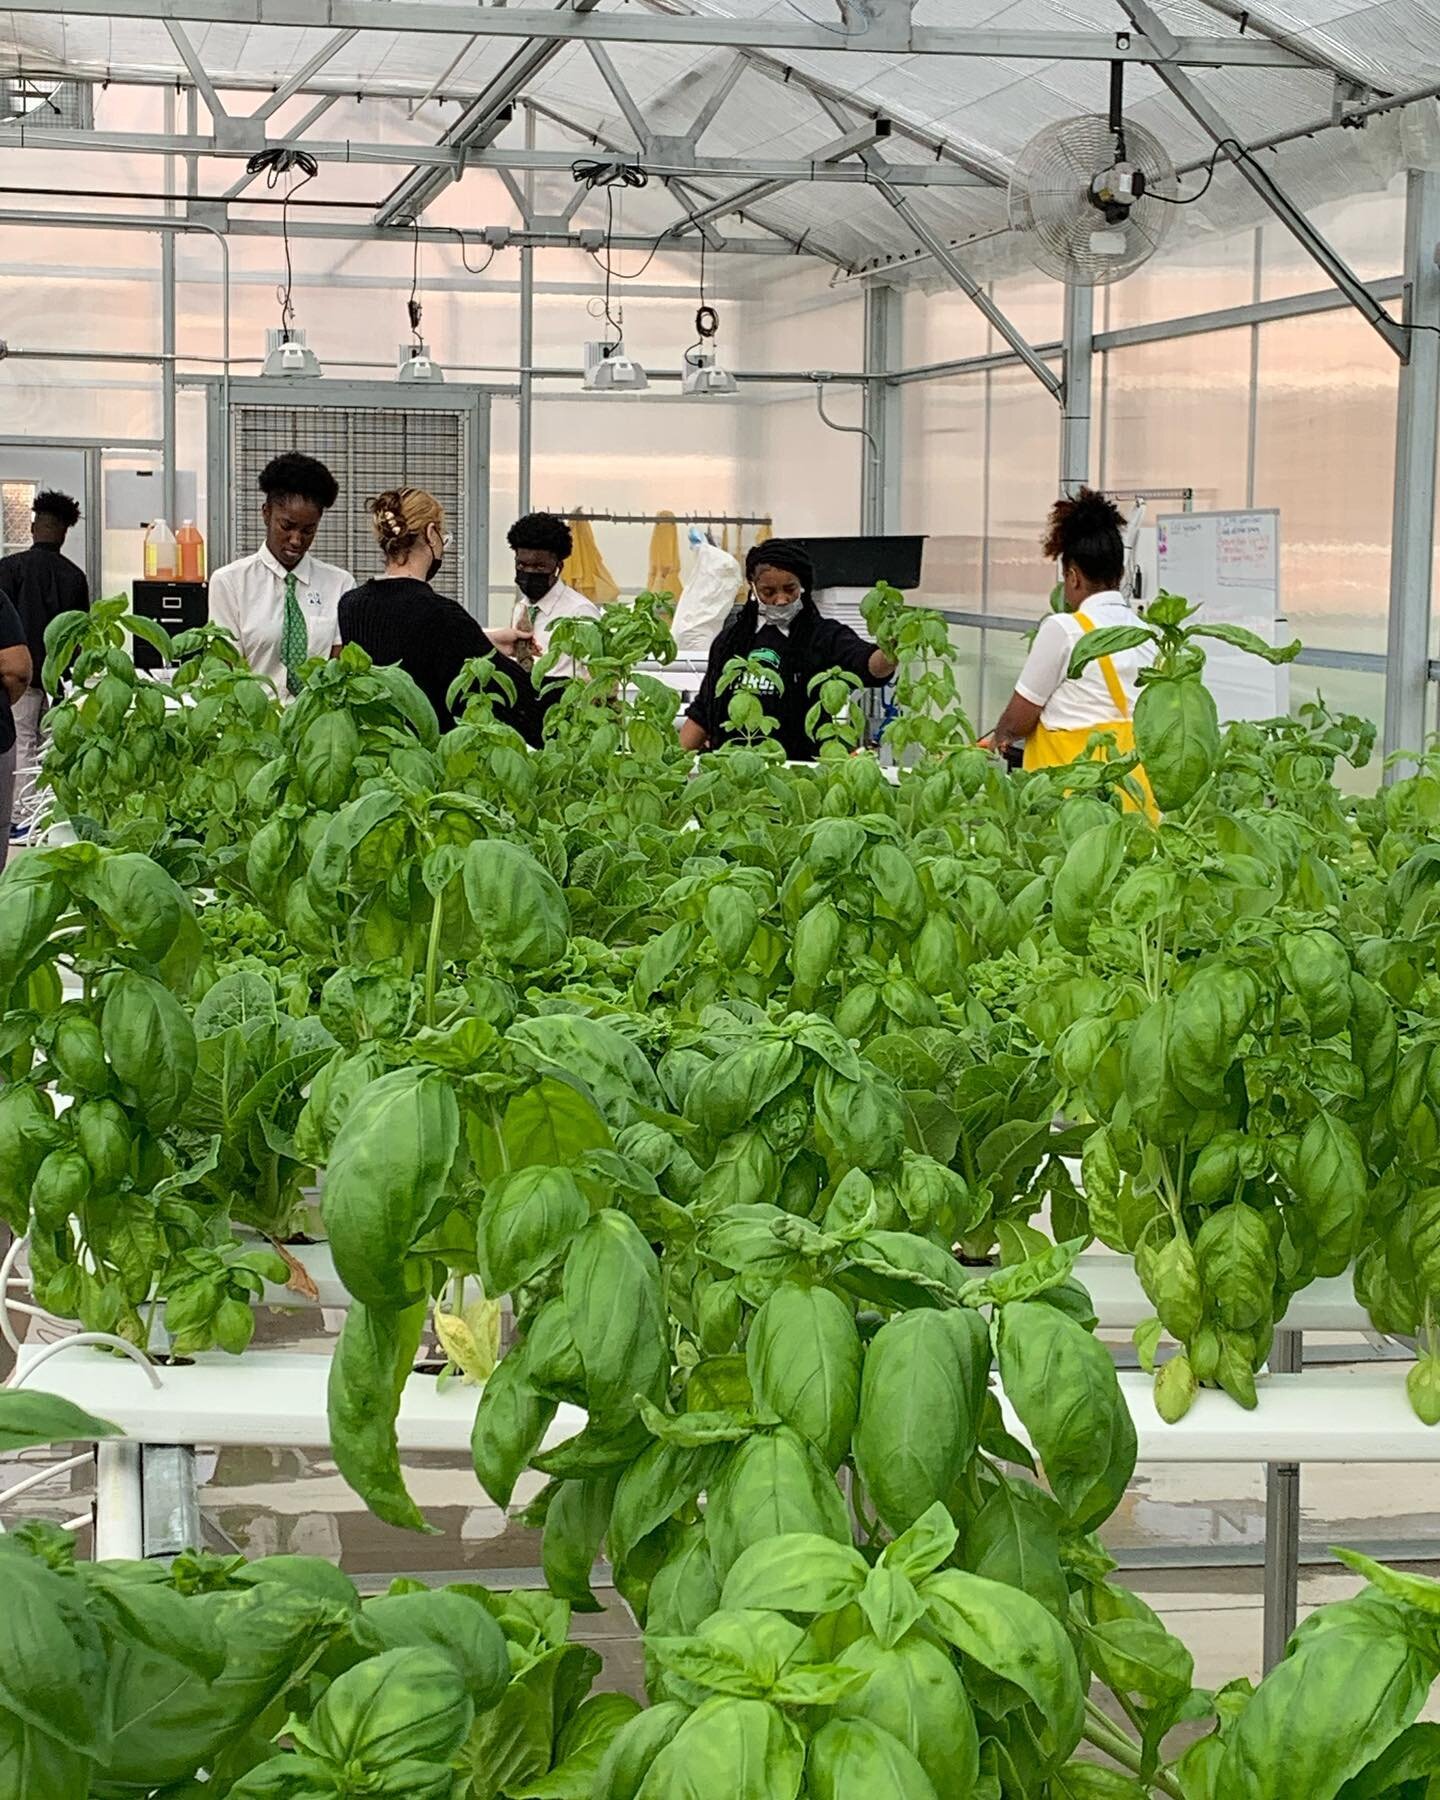 Green Street Academy Youth Scholars harvesting Baltimore Grown Greens for local  plant-based restaurant @stemfarmkitchen this morning! Inspired everyday by this project! #greenstreetacademy #entrepreneurship #local #urbanpastoral #community #baltimor